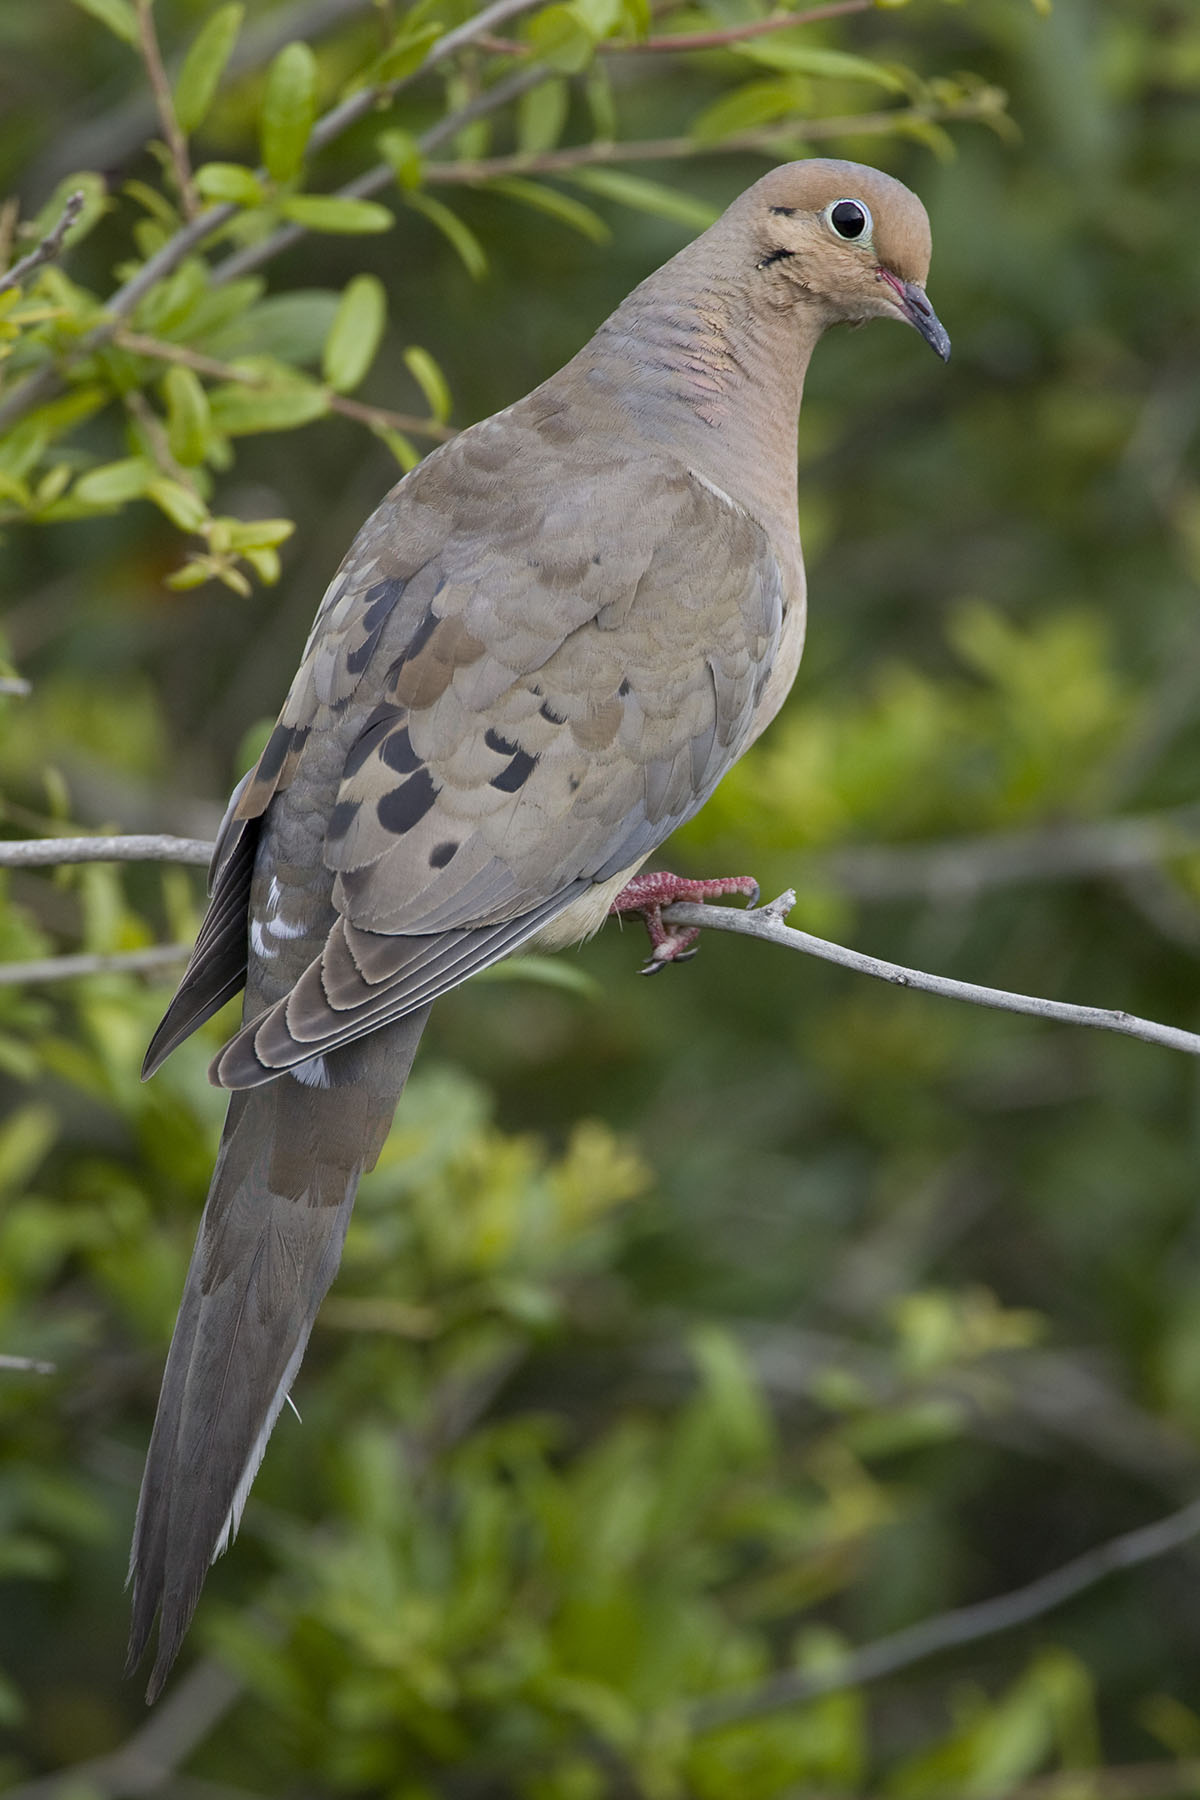 A mourning dove sitting on a thin stick.